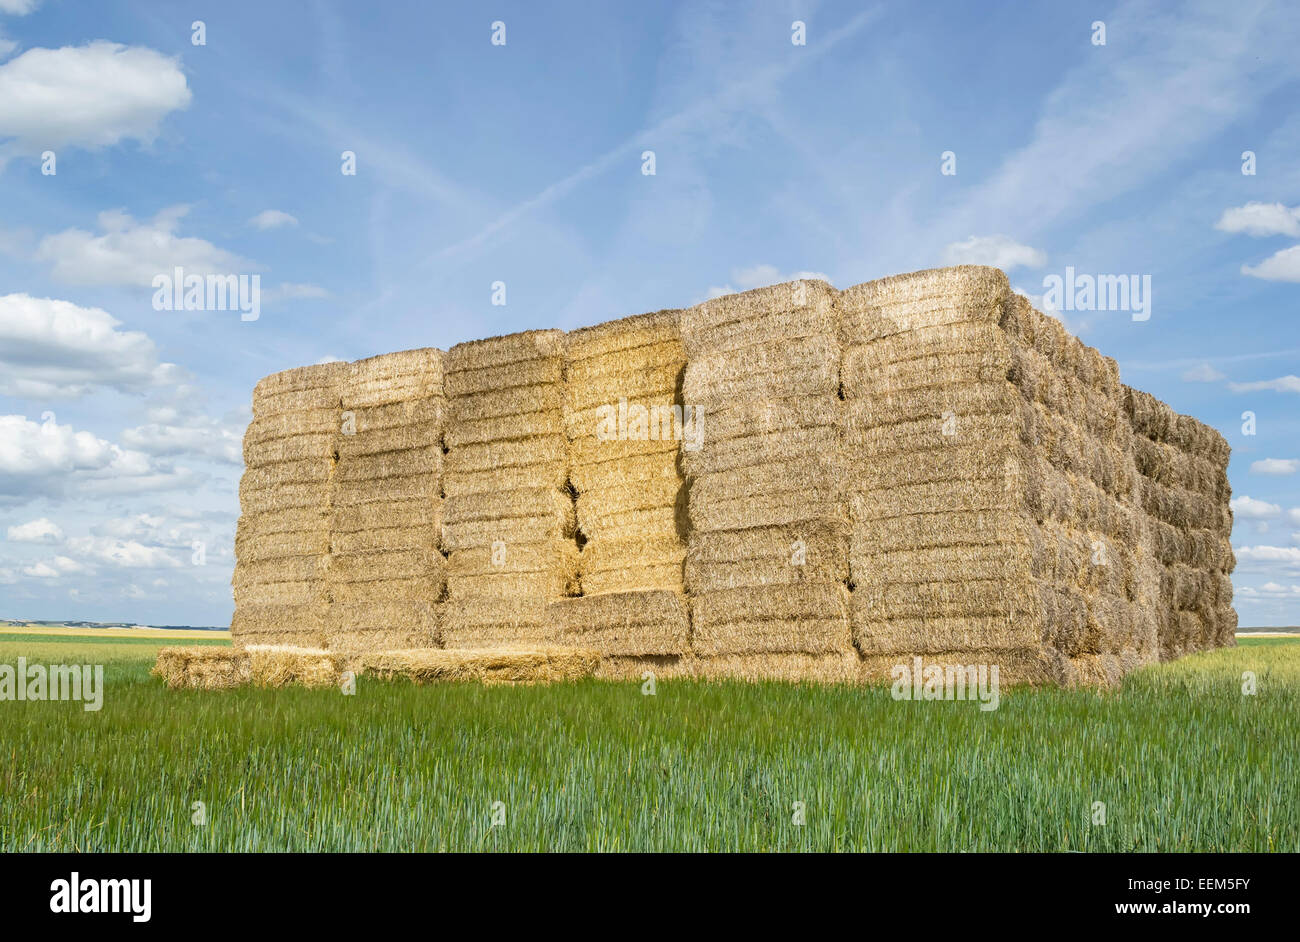 Huge pile of straw bales stacked on top of each other after being gathered from the field Stock Photo